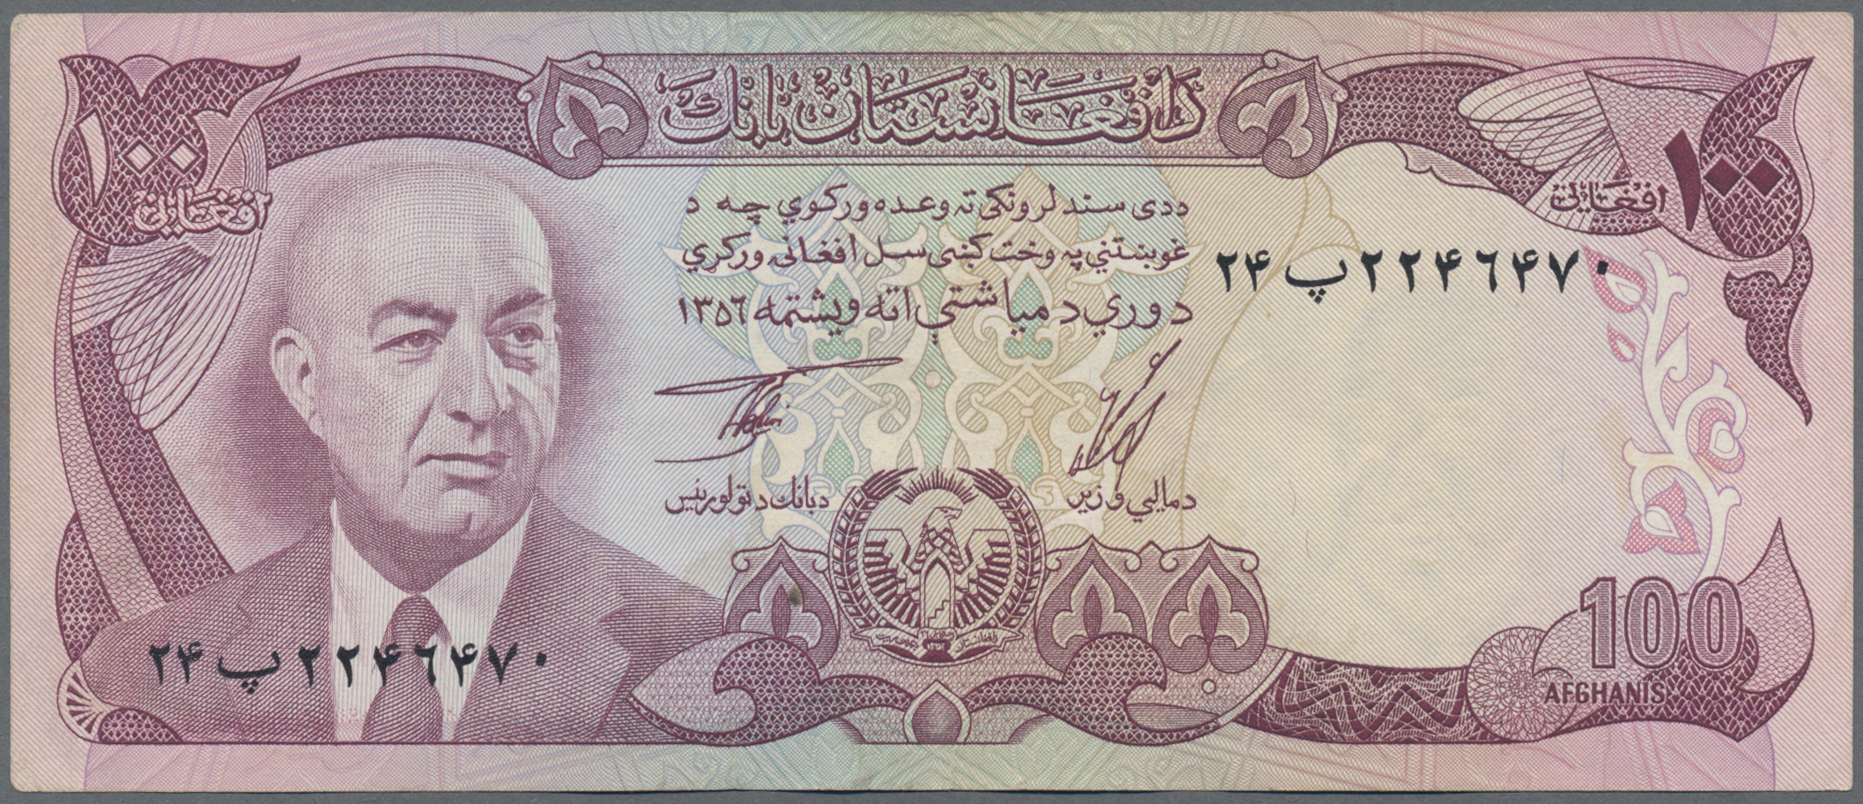 Lot 501 - Afghanistan | Banknoten  -  Auktionshaus Christoph Gärtner GmbH & Co. KG 52nd Auction - Day 1